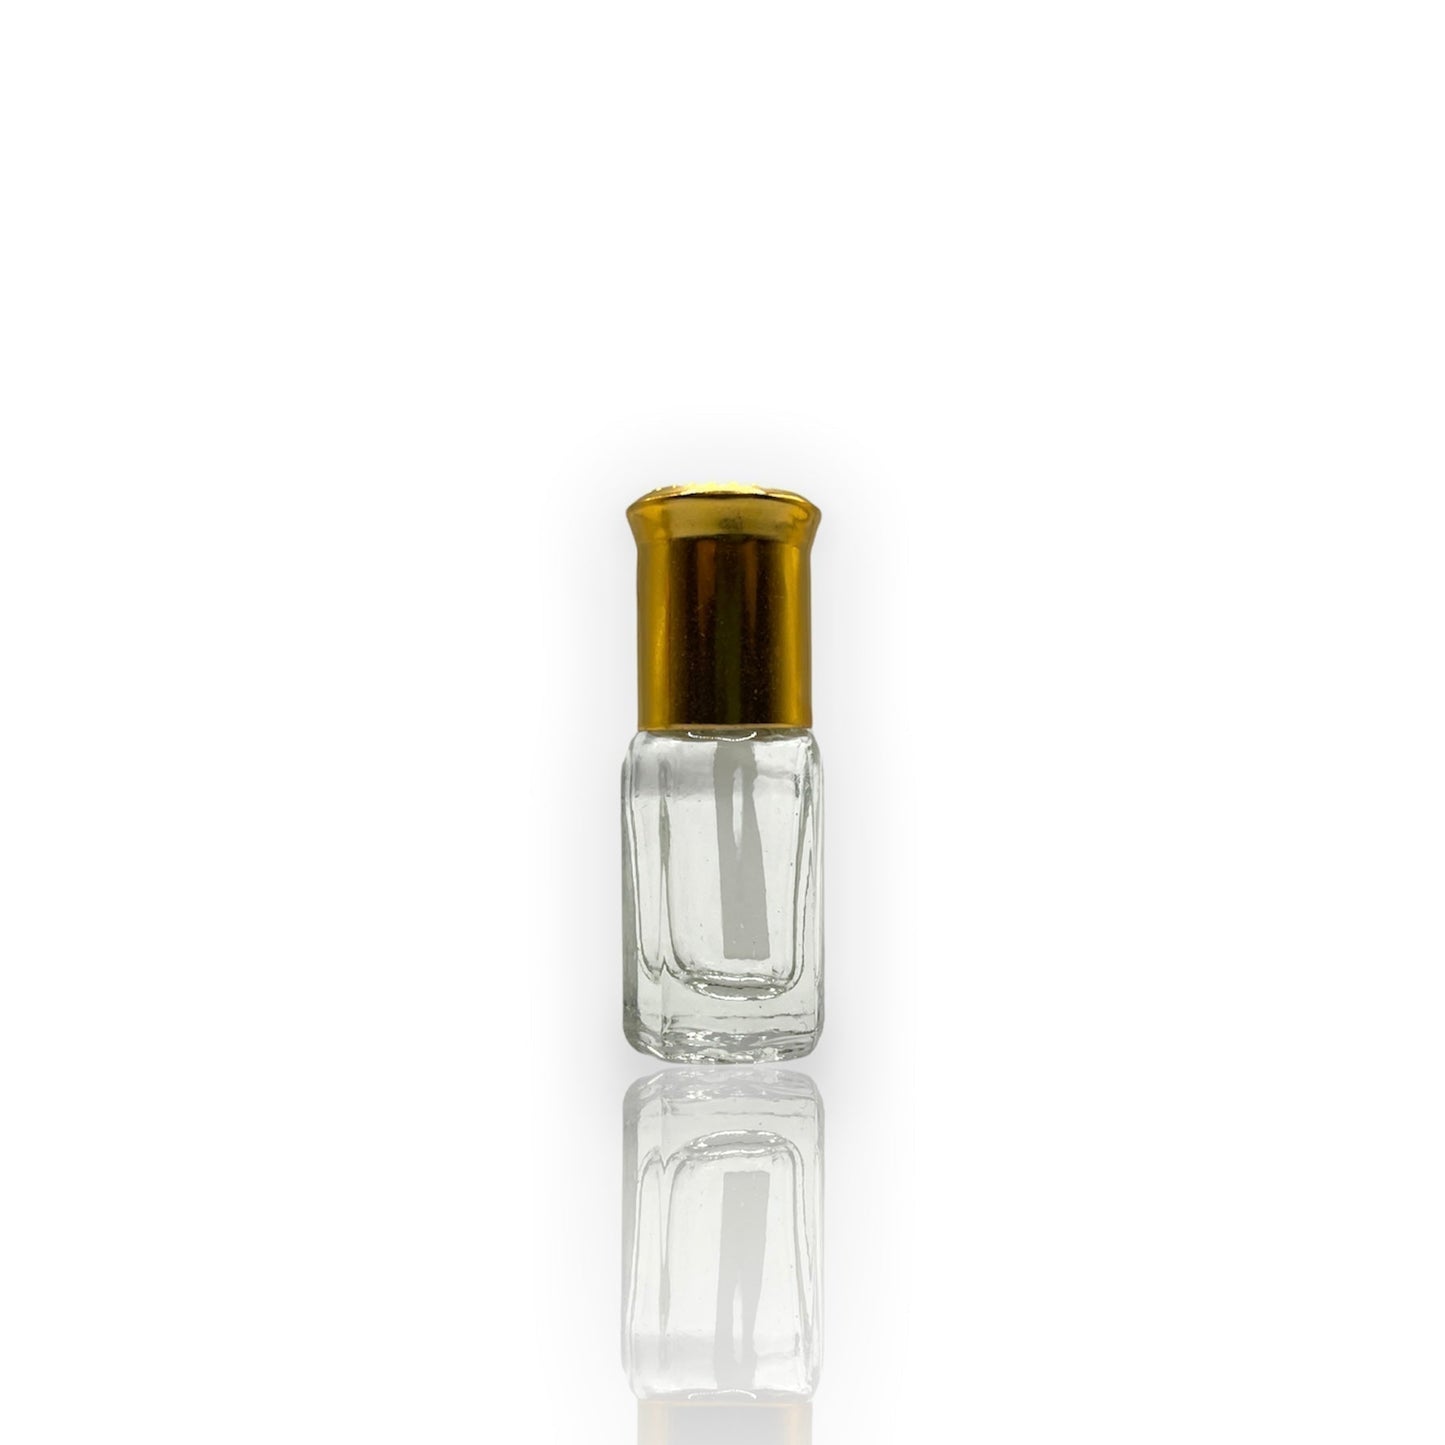 M-28 Oil Perfume *Inspired By Tom Ford Oud Wood